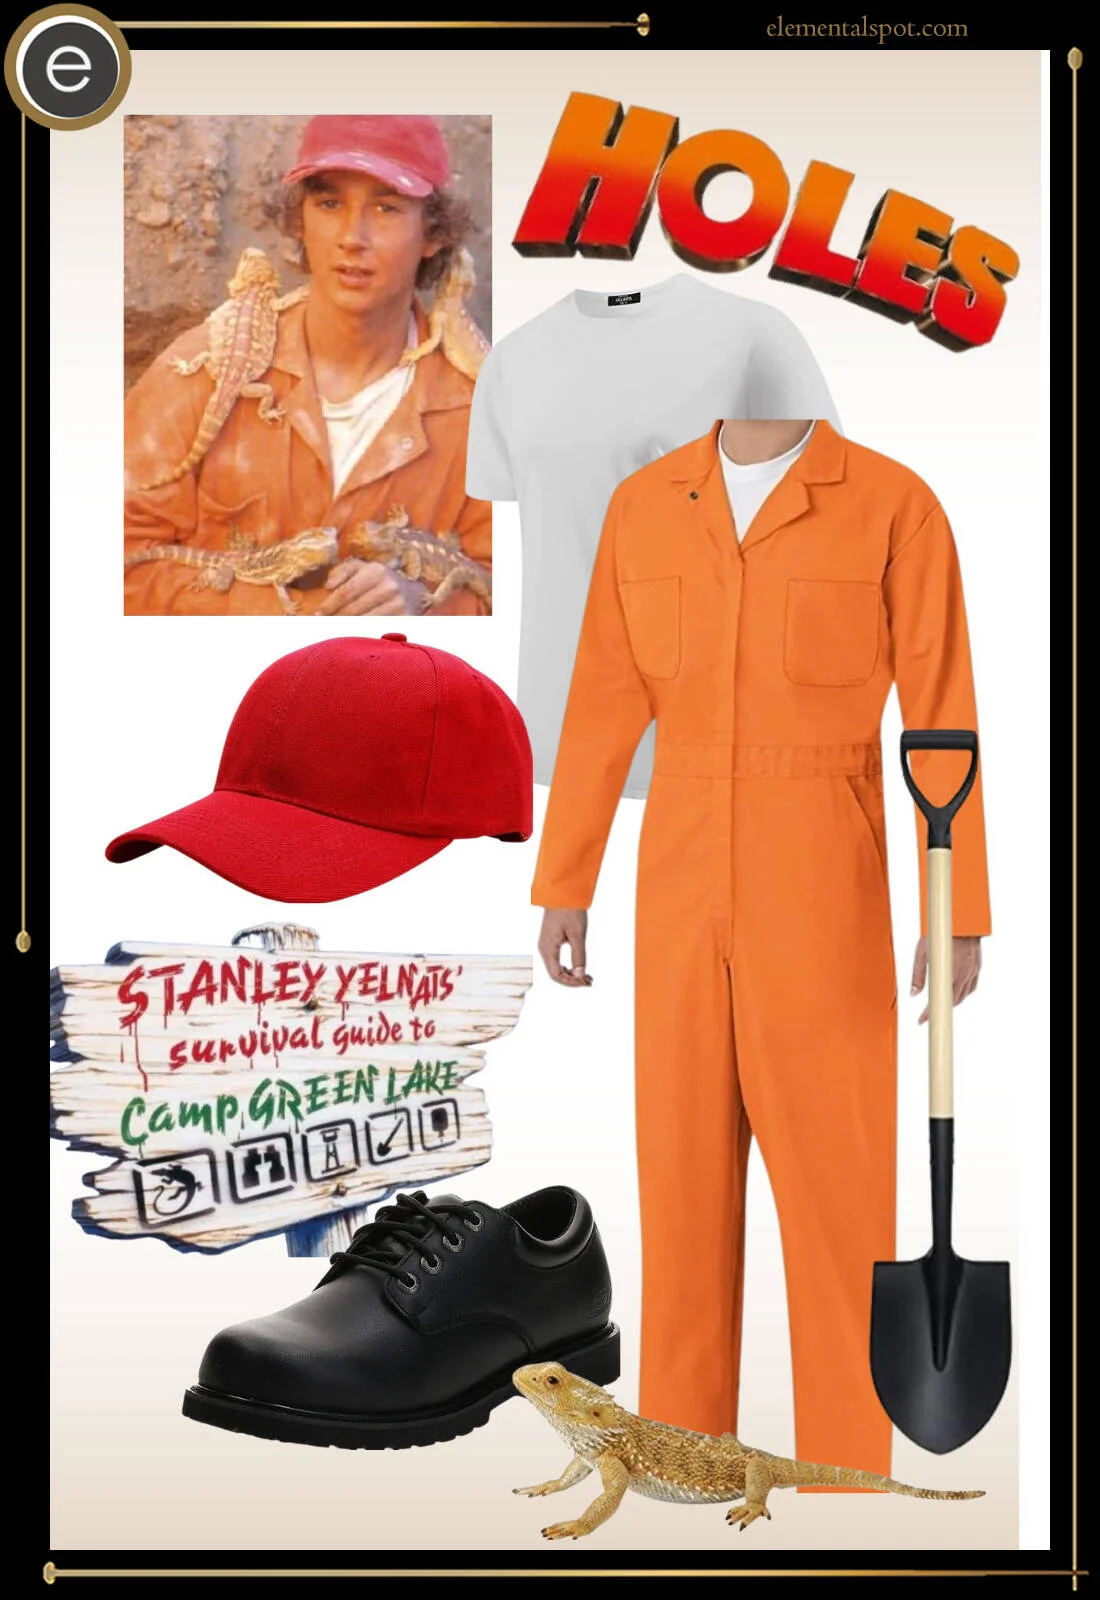 stanley yelnats costume outfit inspo.jpg